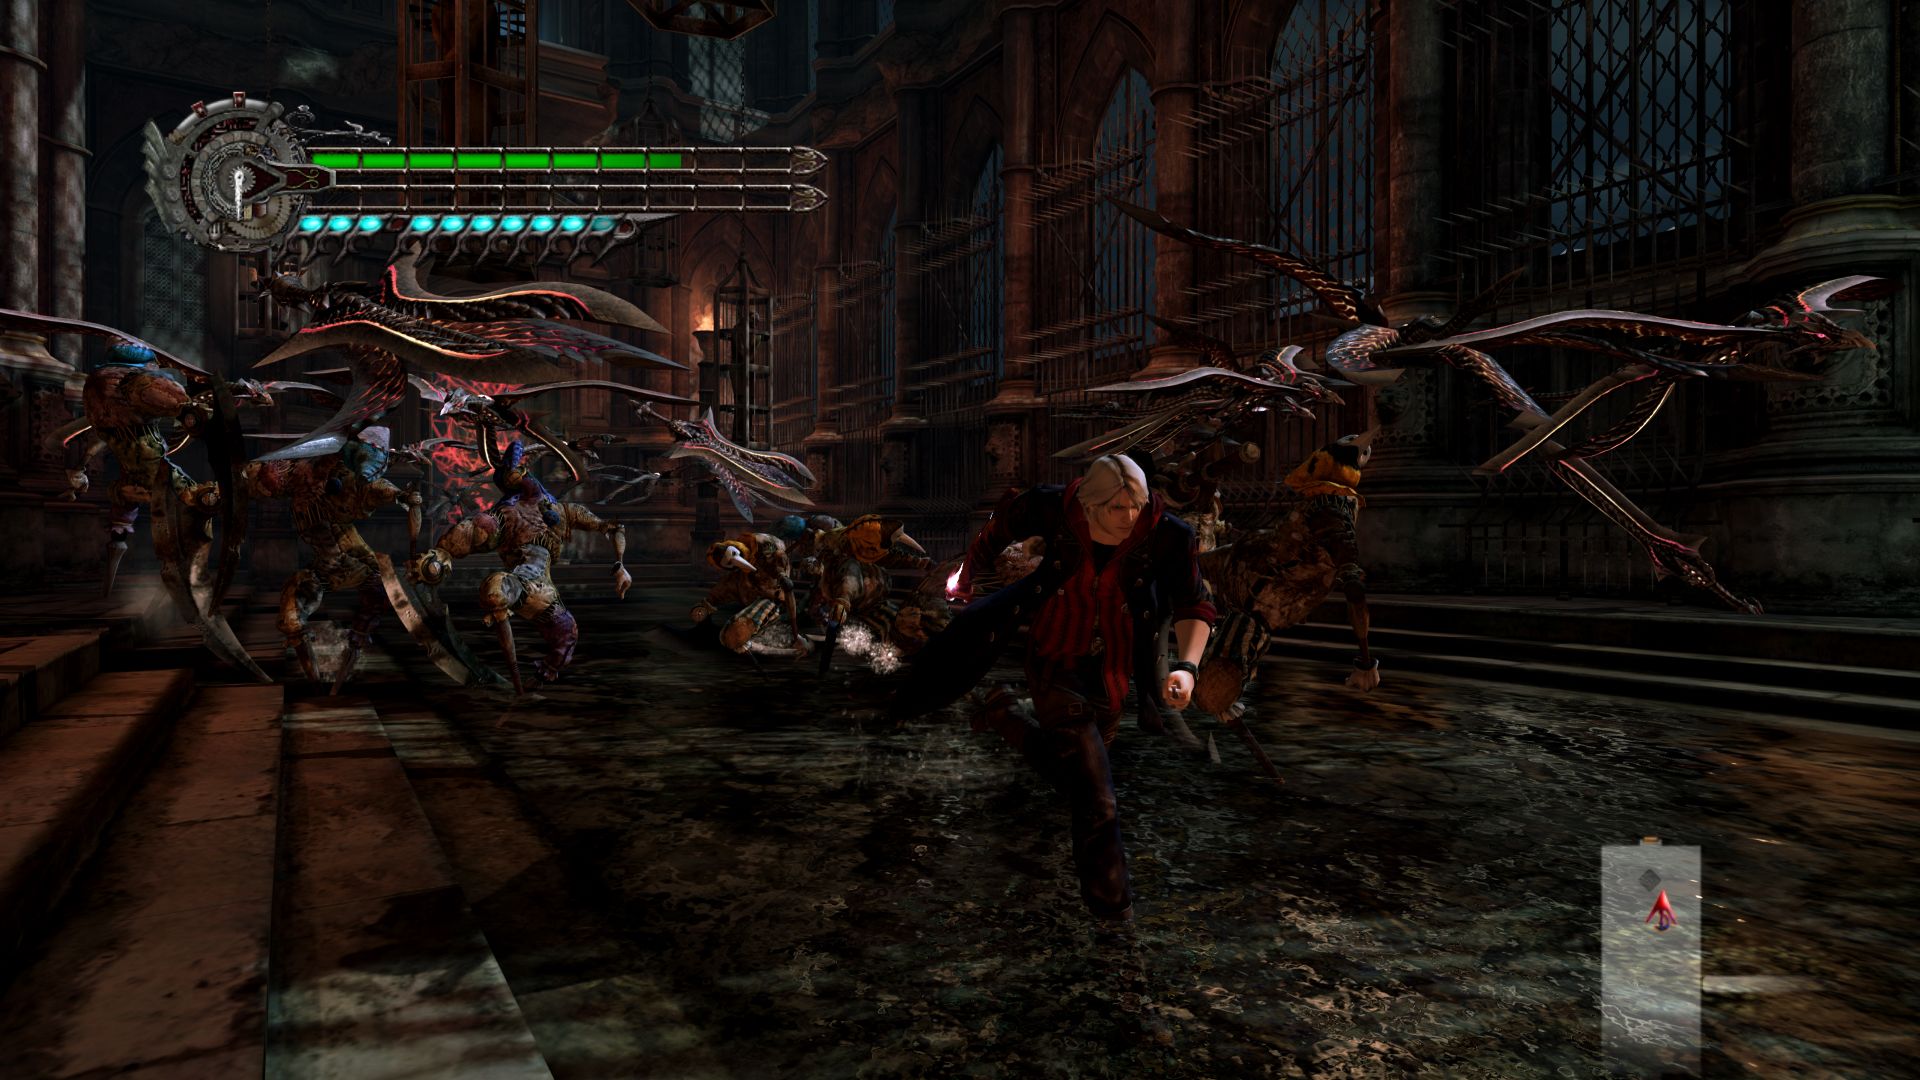 Media asset in full size related to 3dfxzone.it news item entitled as follows: Capcom: Devil May Cry 4 in versione PC arriva in estate | Image Name: news7376_1.jpg